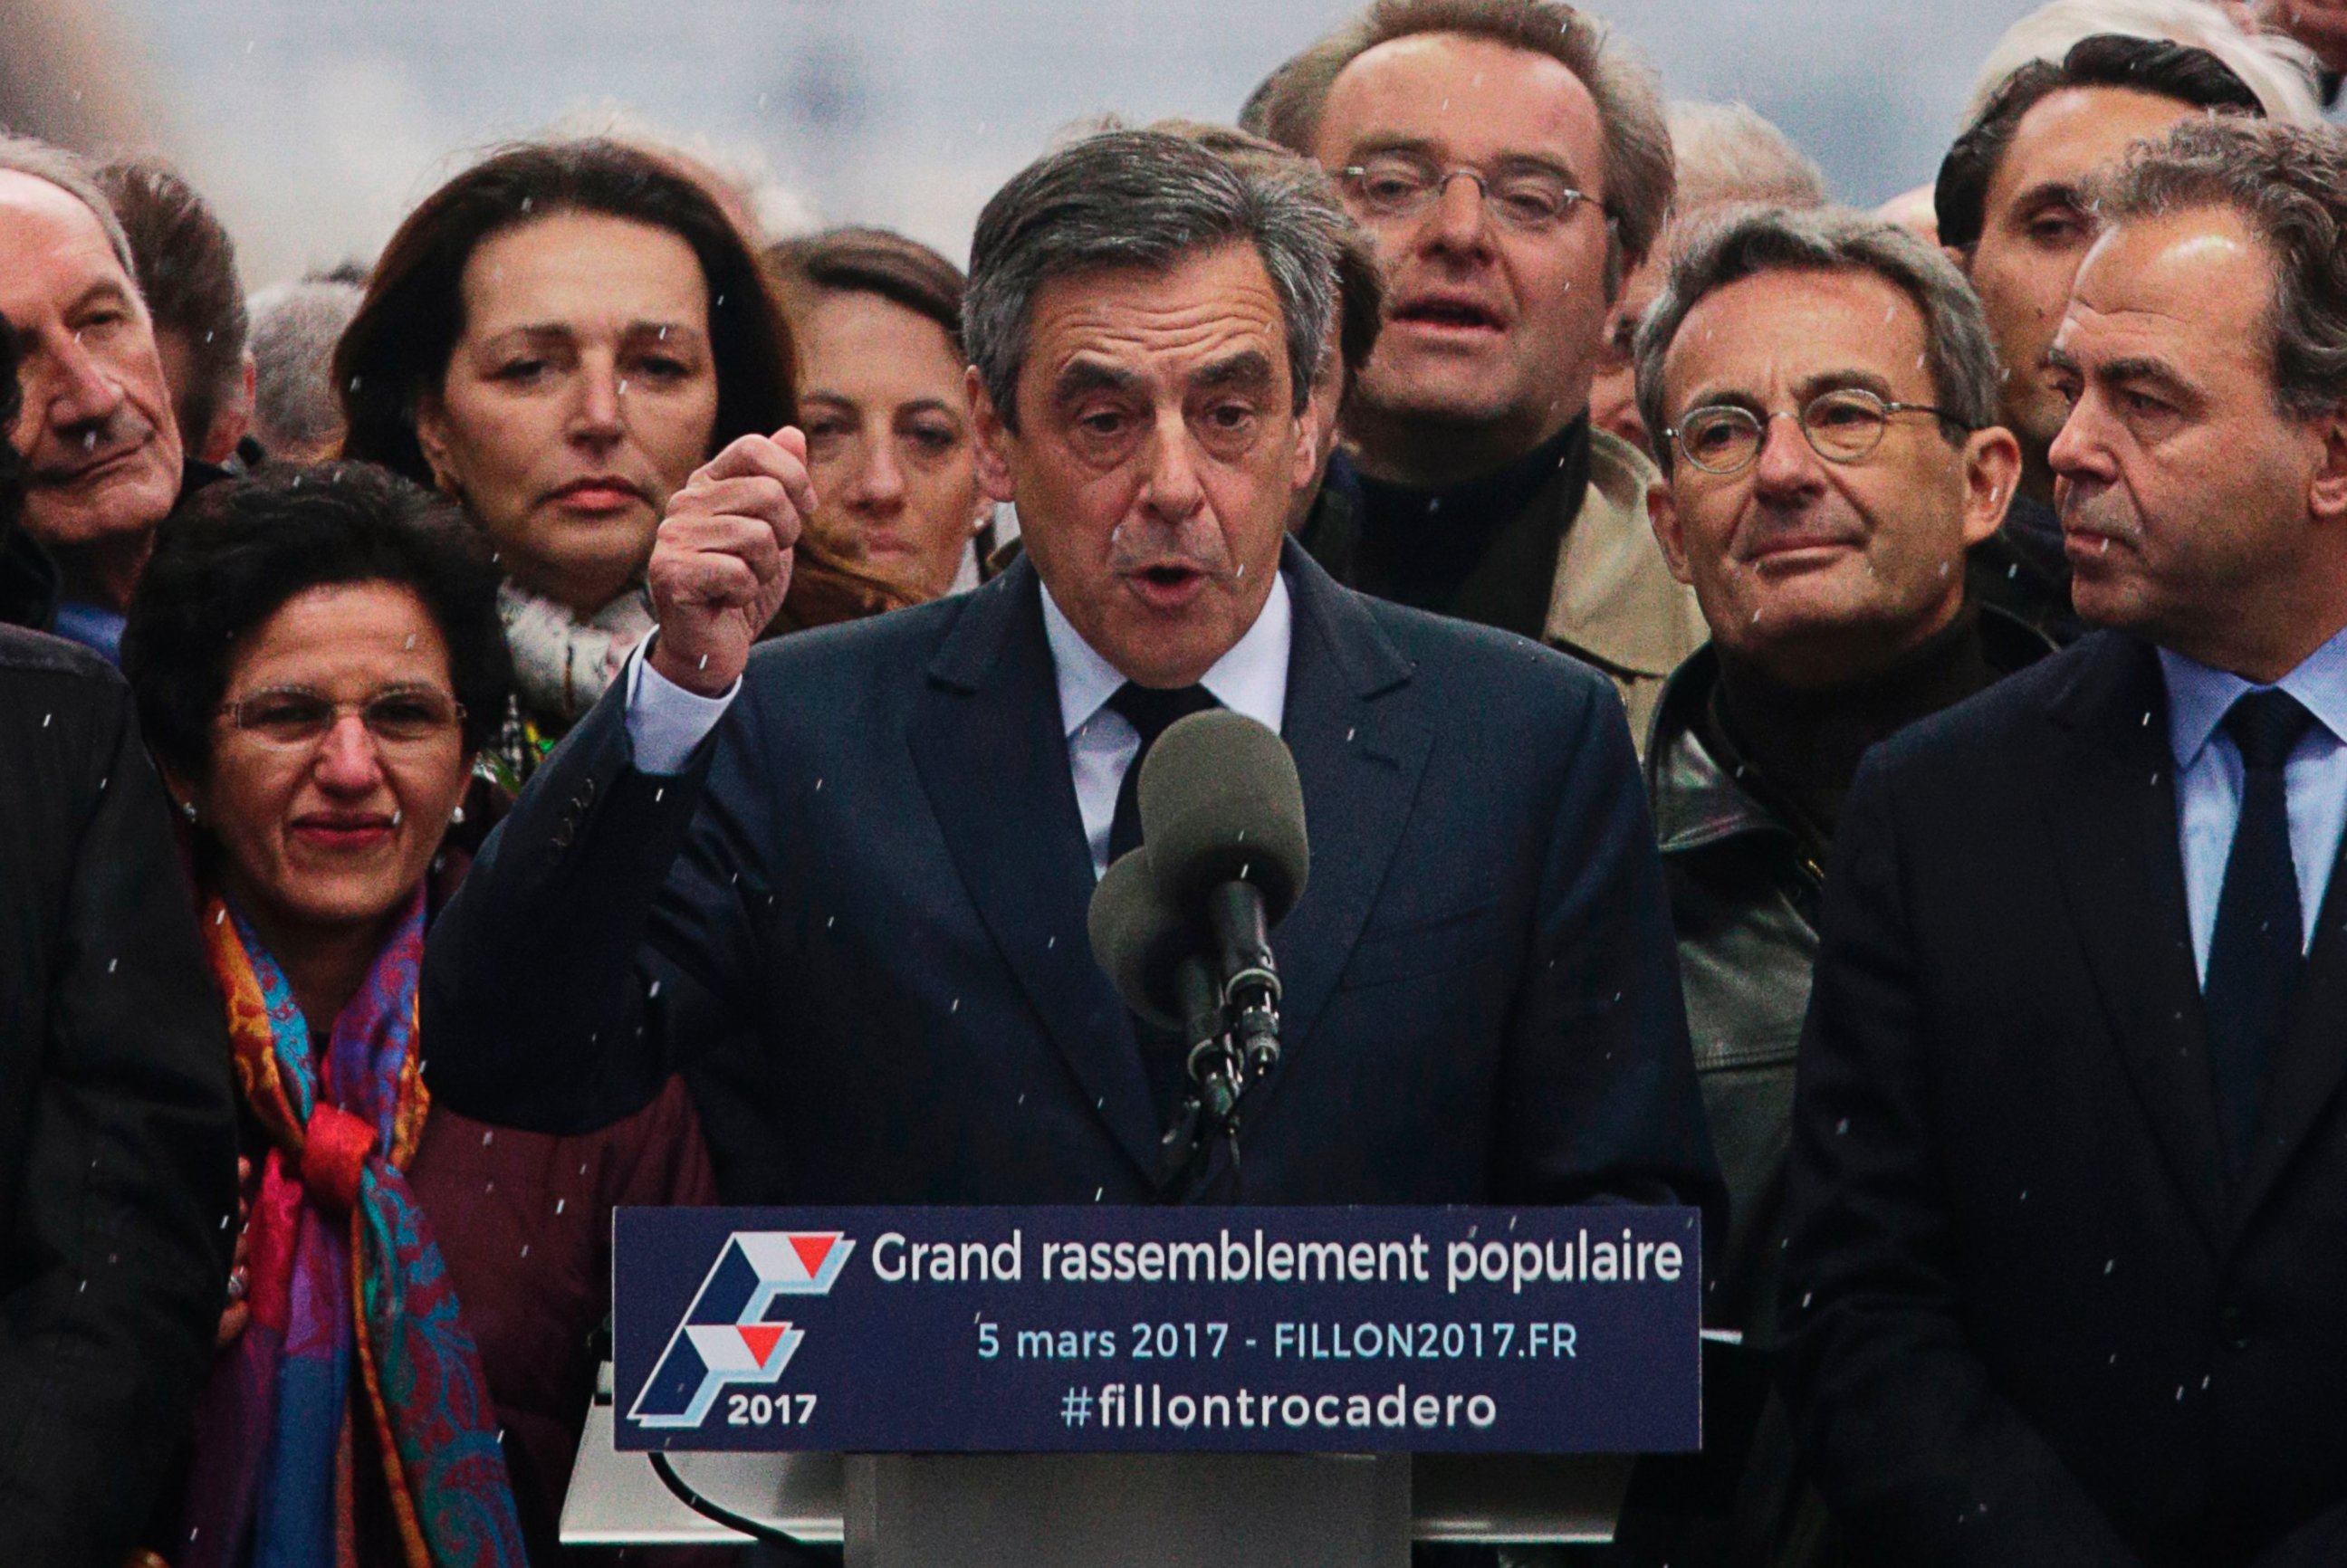 PHOTO: French presidential candidate for the right-wing Les Republicains party Francois Fillon, center, gestures as he delivers a speech on stage during a rally at the place du Trocadero, in Paris, March 5, 2017.